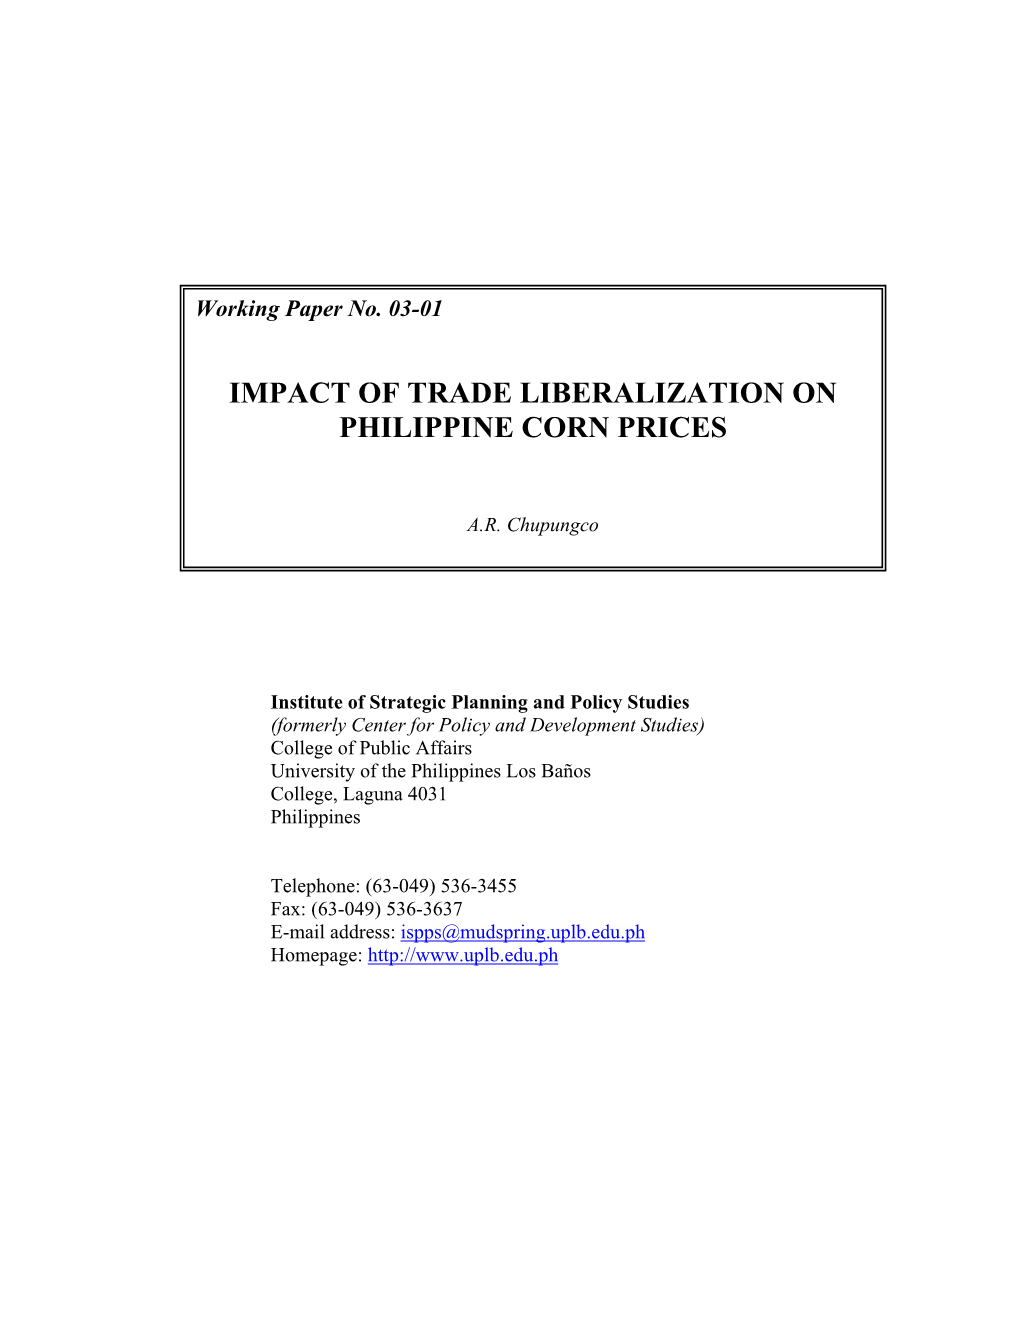 Impact of Trade Liberalization on Philippine Corn Prices